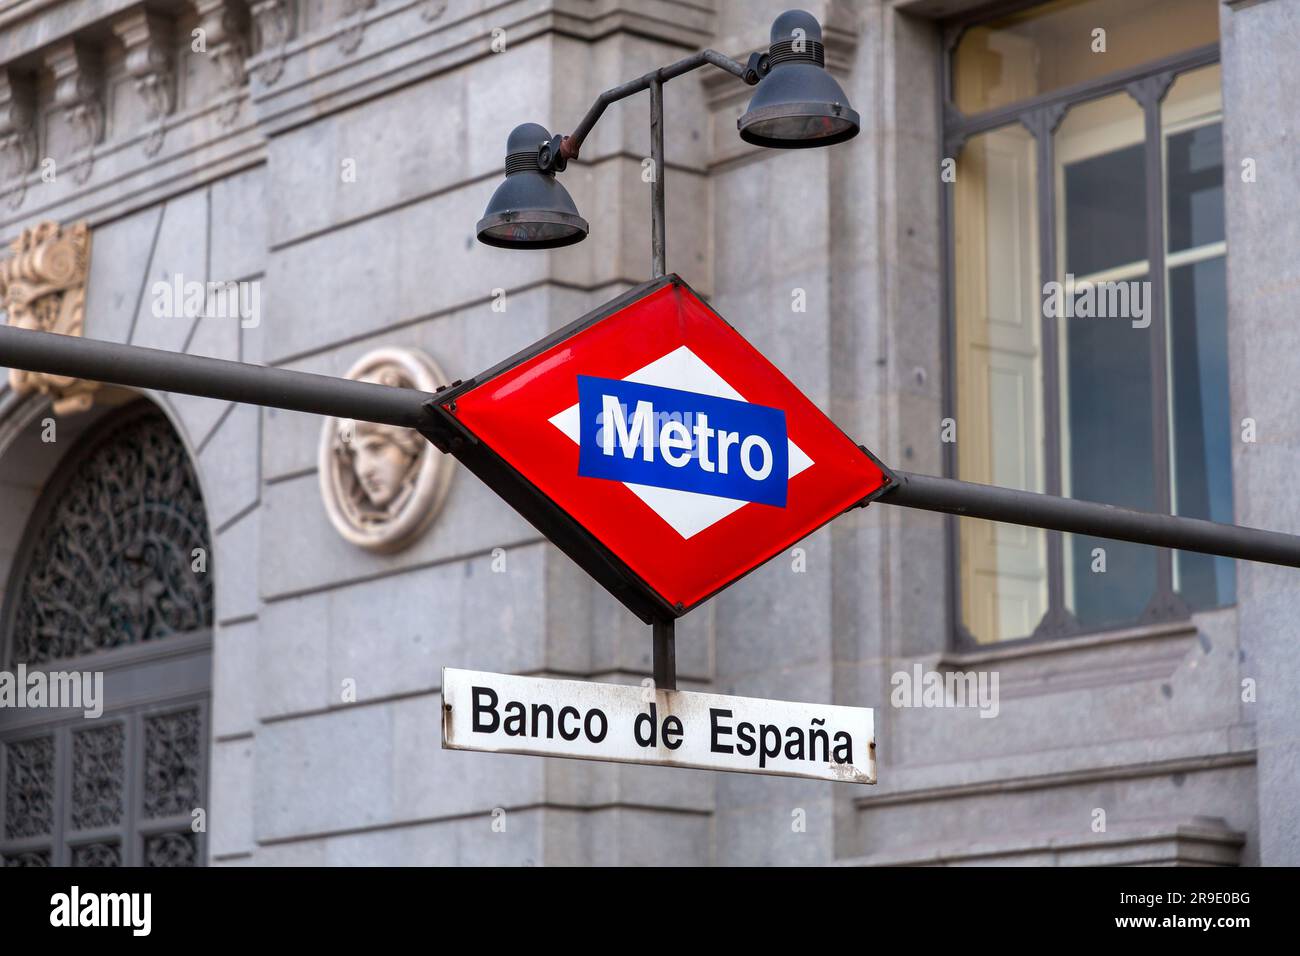 Madrid, Spain - FEB 16, 2022: Metro sign and logo at the entrance of Banco de Espana Station in Madrid, Spain. Stock Photo